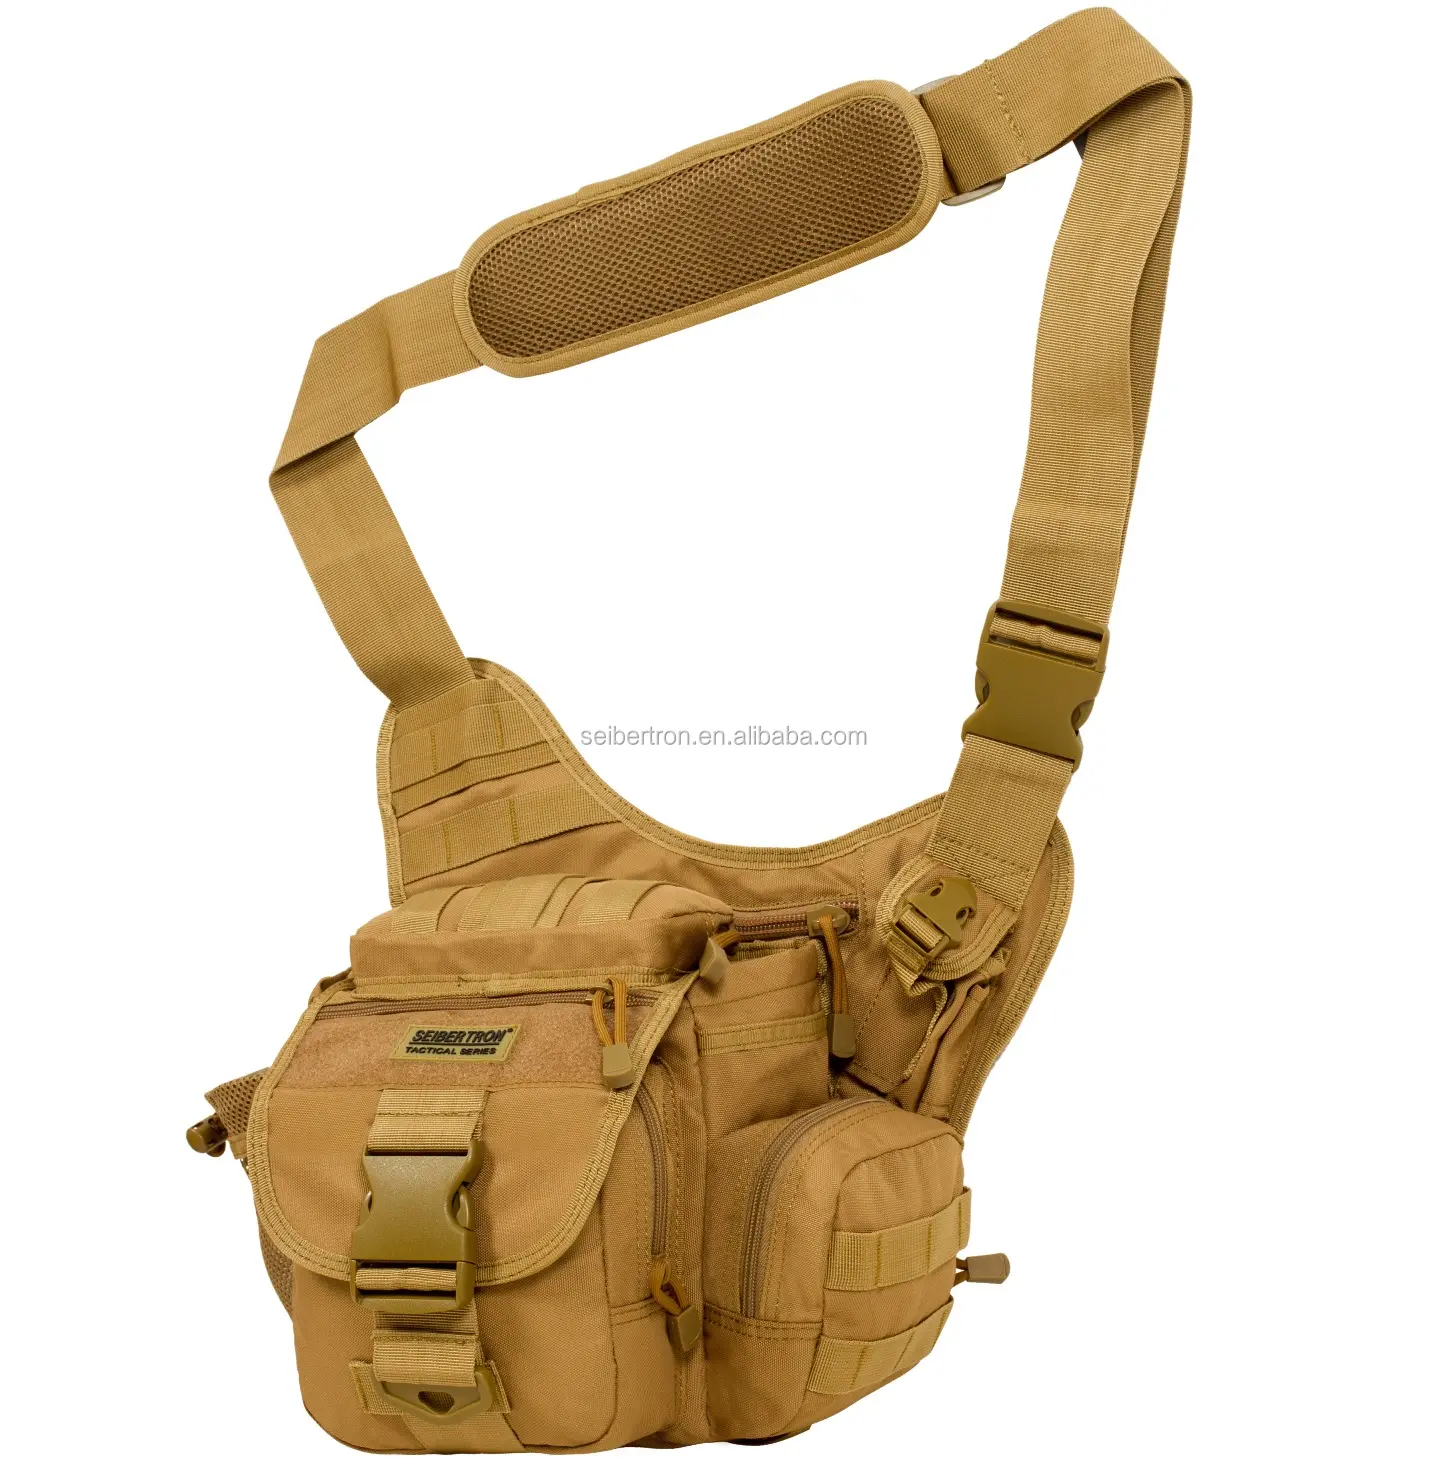 Seibertron X.K.B.B-1 Tactical Outlaw Sling Pack with Shoulder Sling for Carry Molle Multifunctional Day Bag for EDC